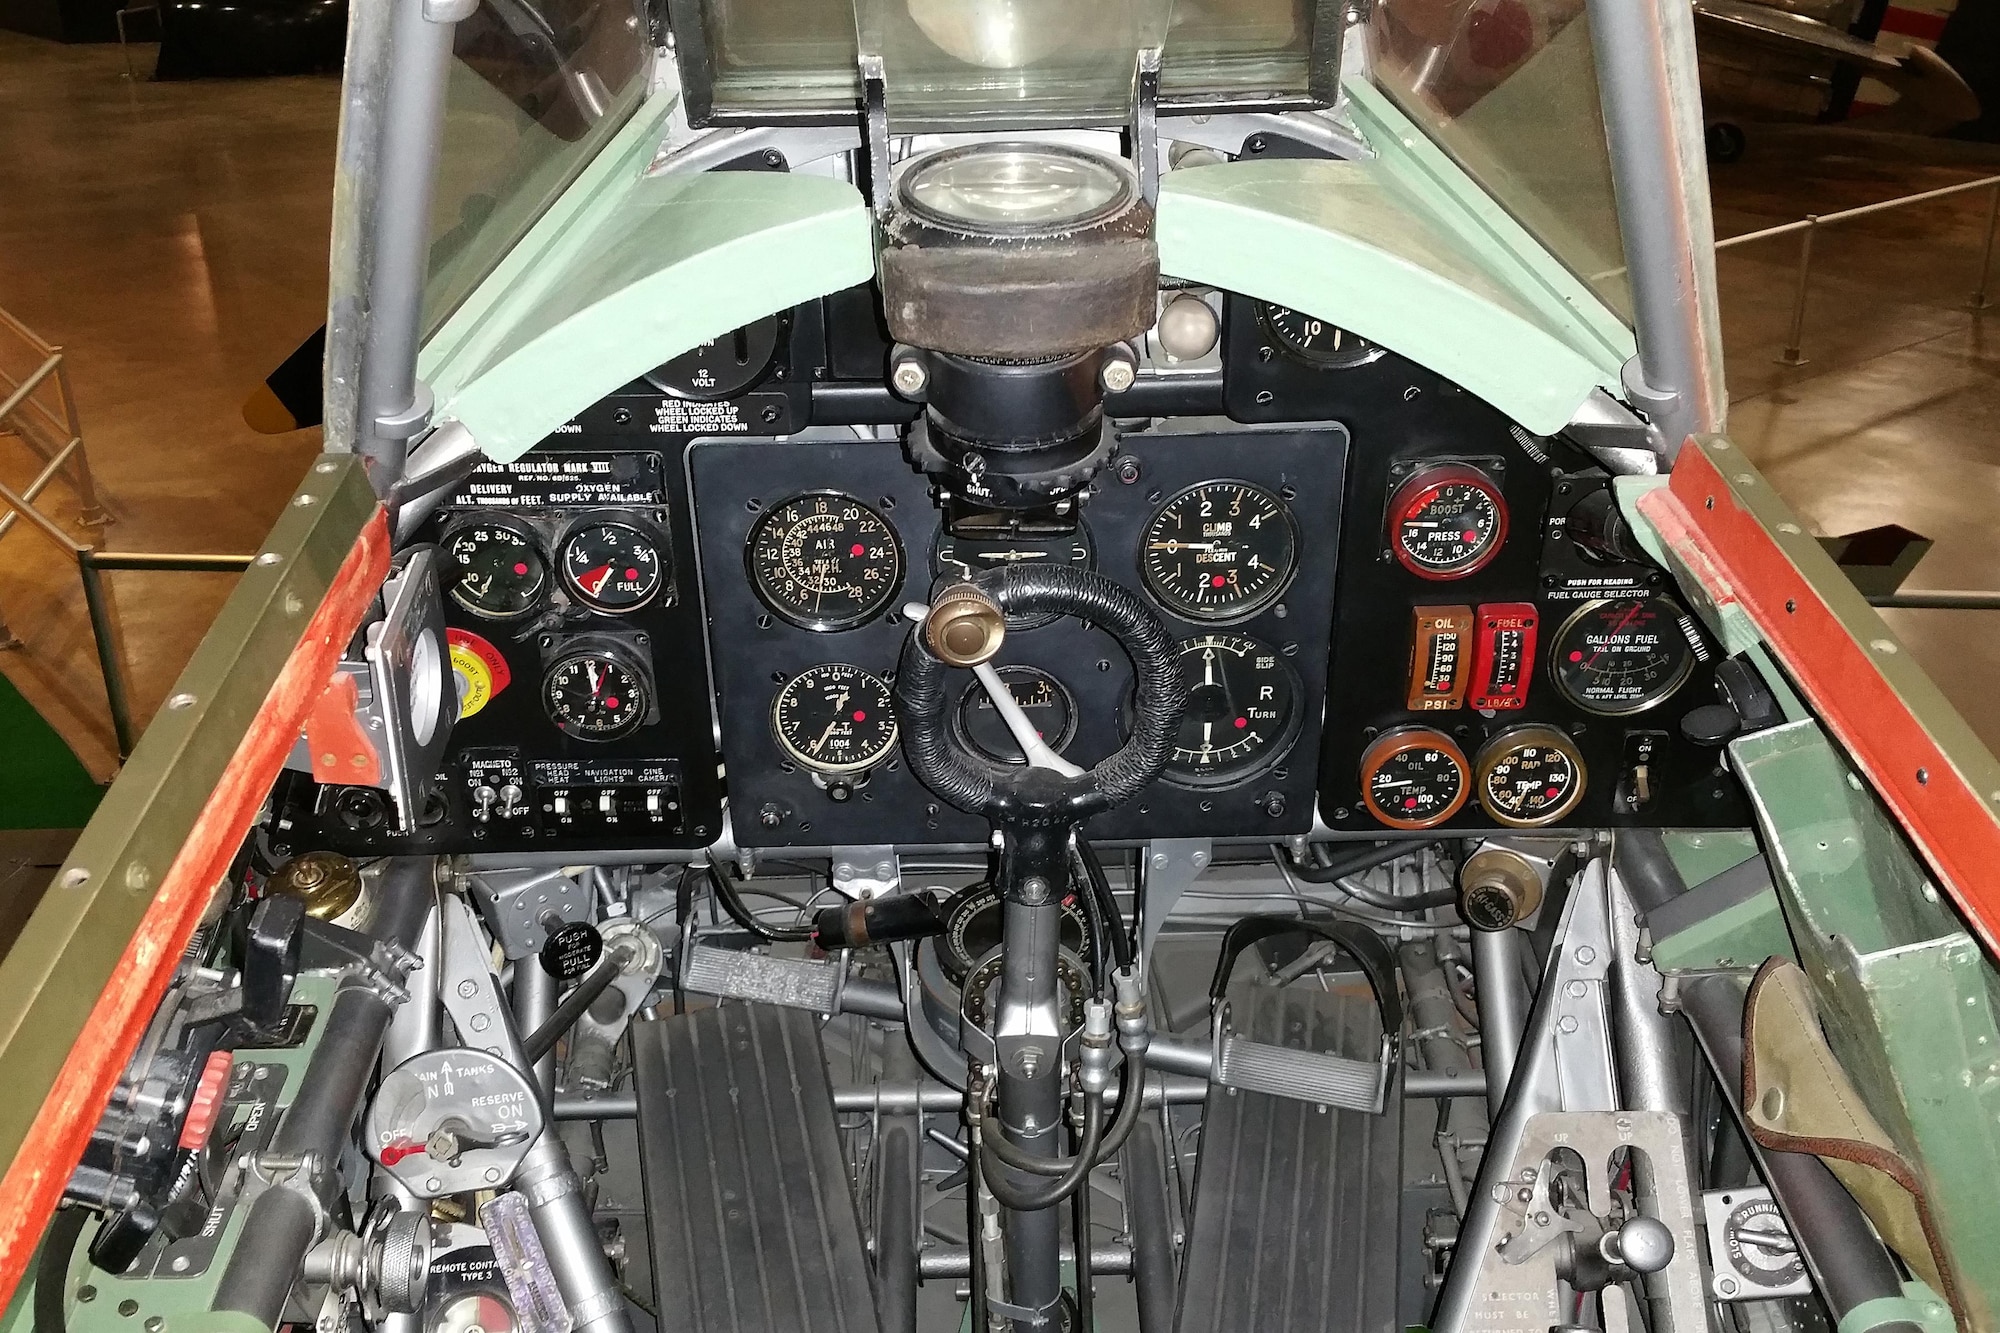 DAYTON, Ohio -- Hawker Hurricane cockpit in the Early Years Gallery at the National Museum of the United States Air Force. (U.S. Air Force photo)